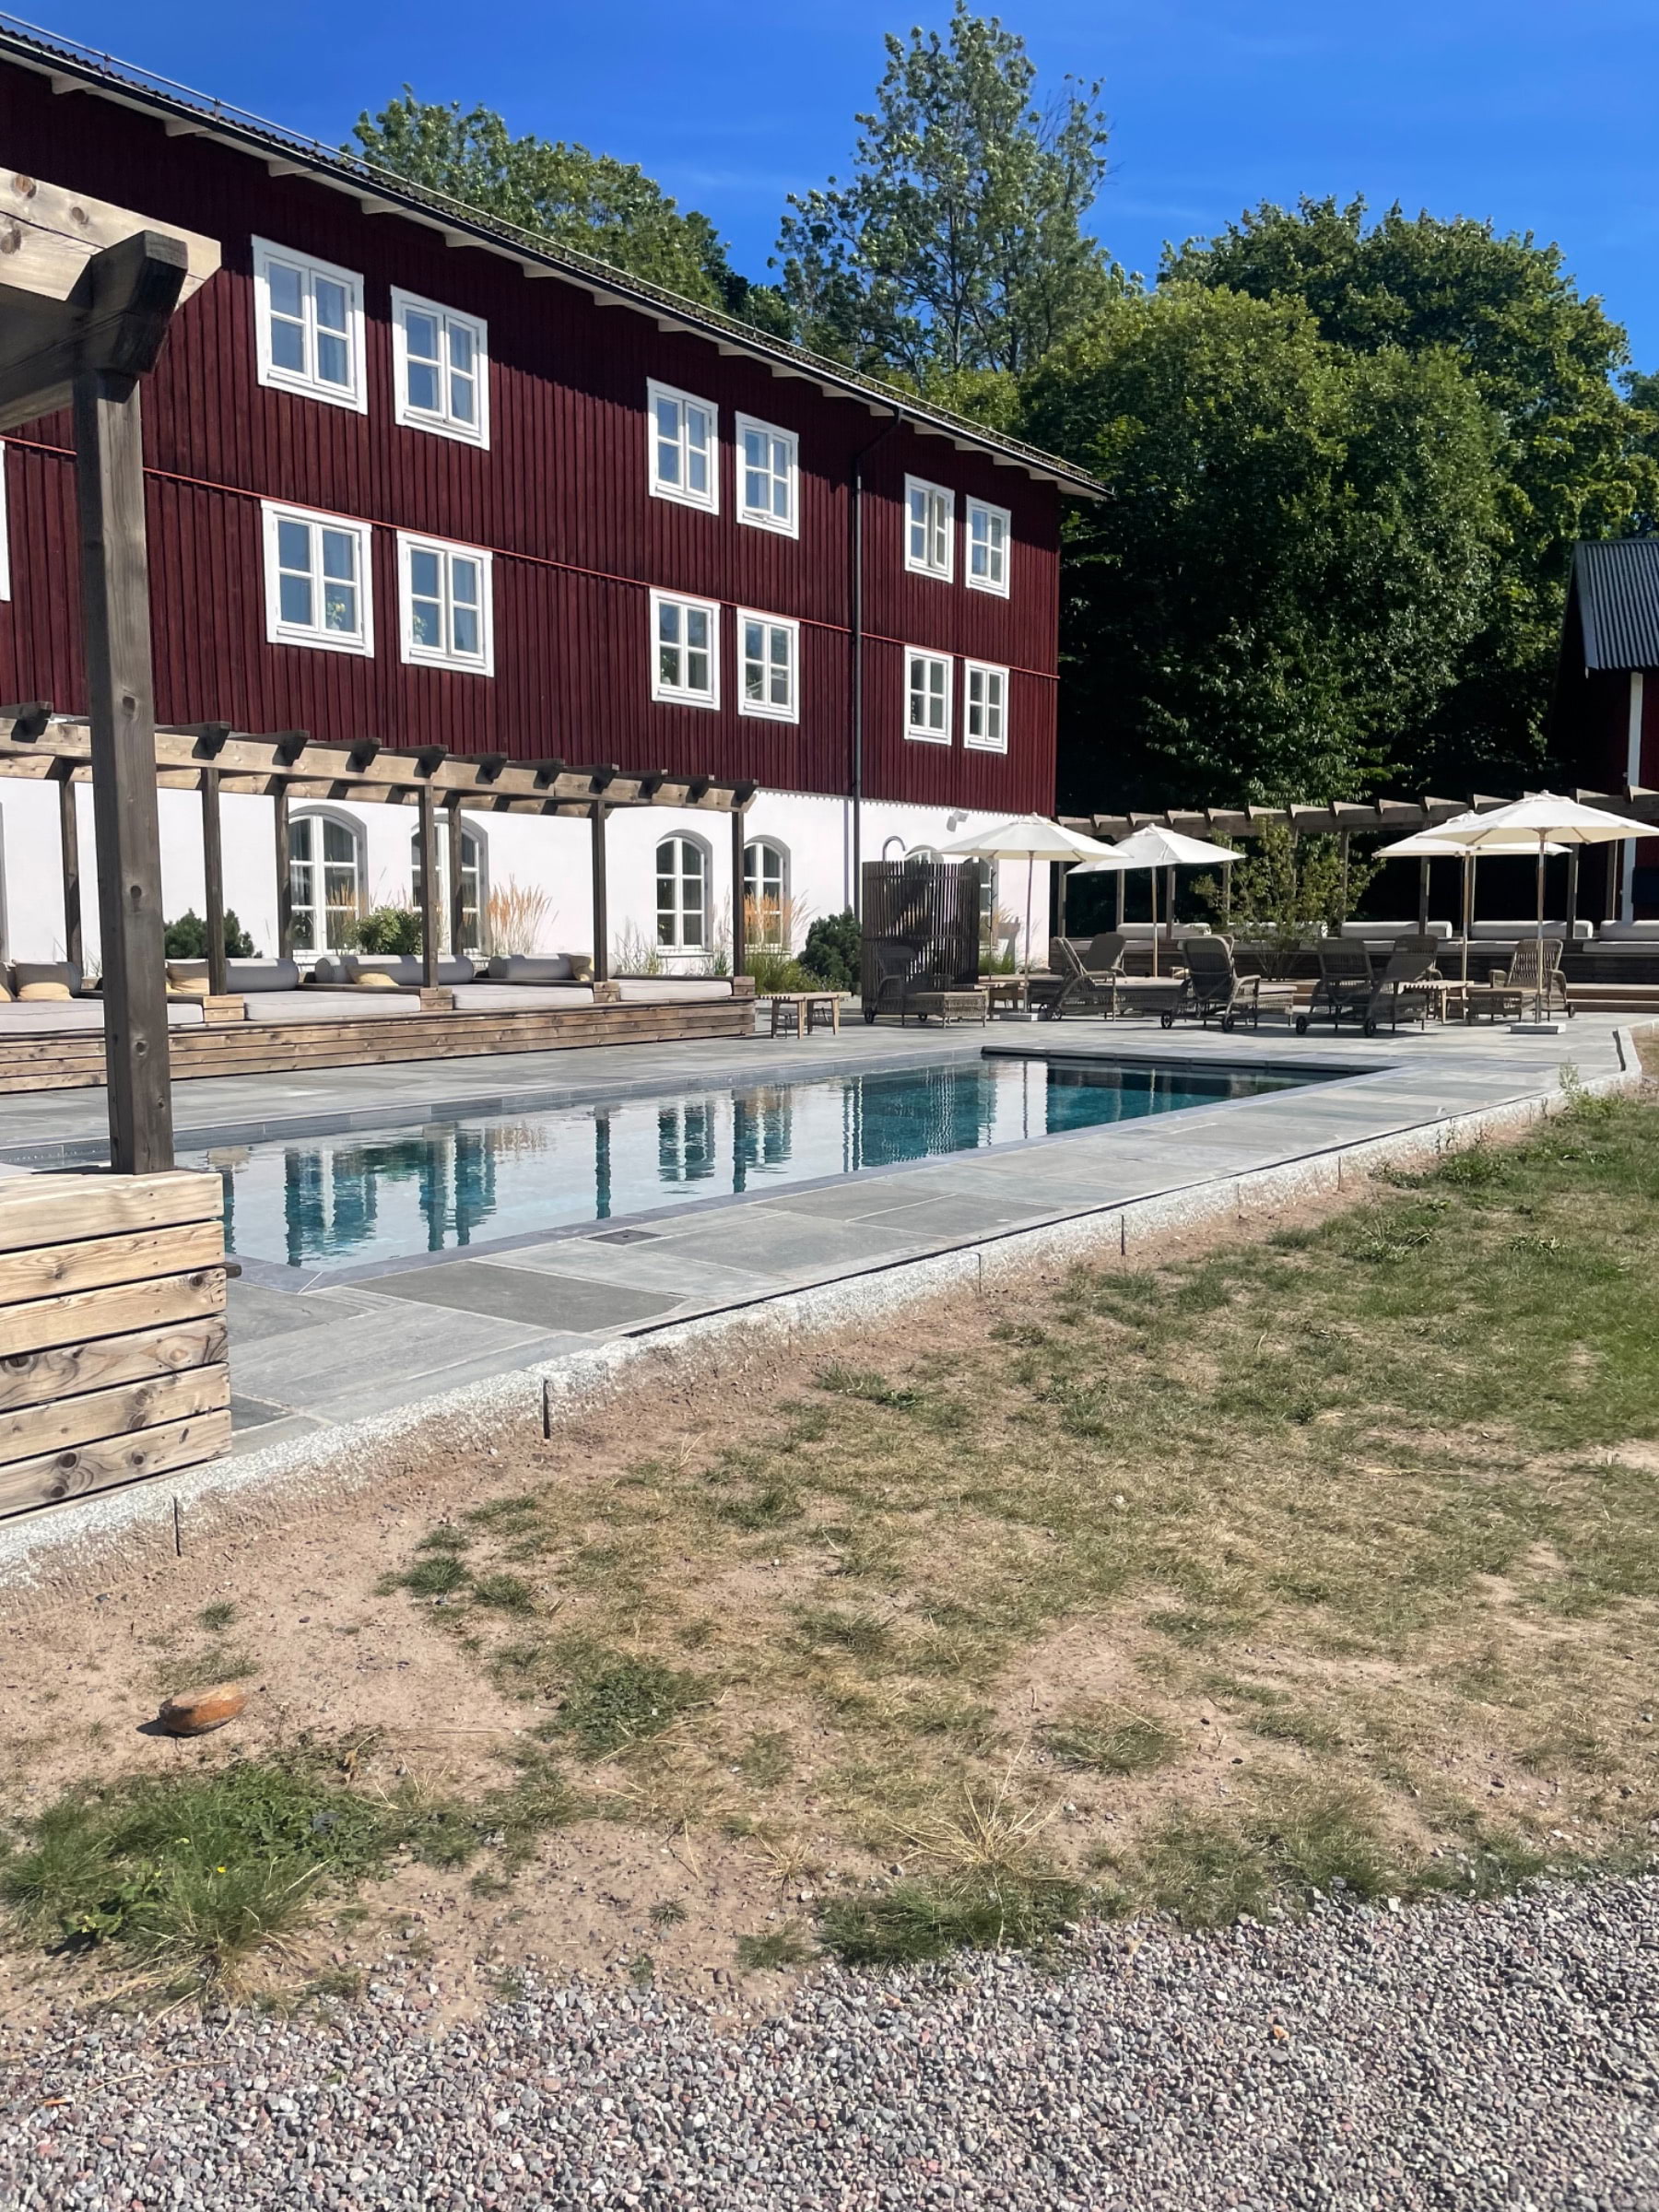 Photo from Skytteholm Hotell & Konferens by Mimmi S. (17/08/2022)